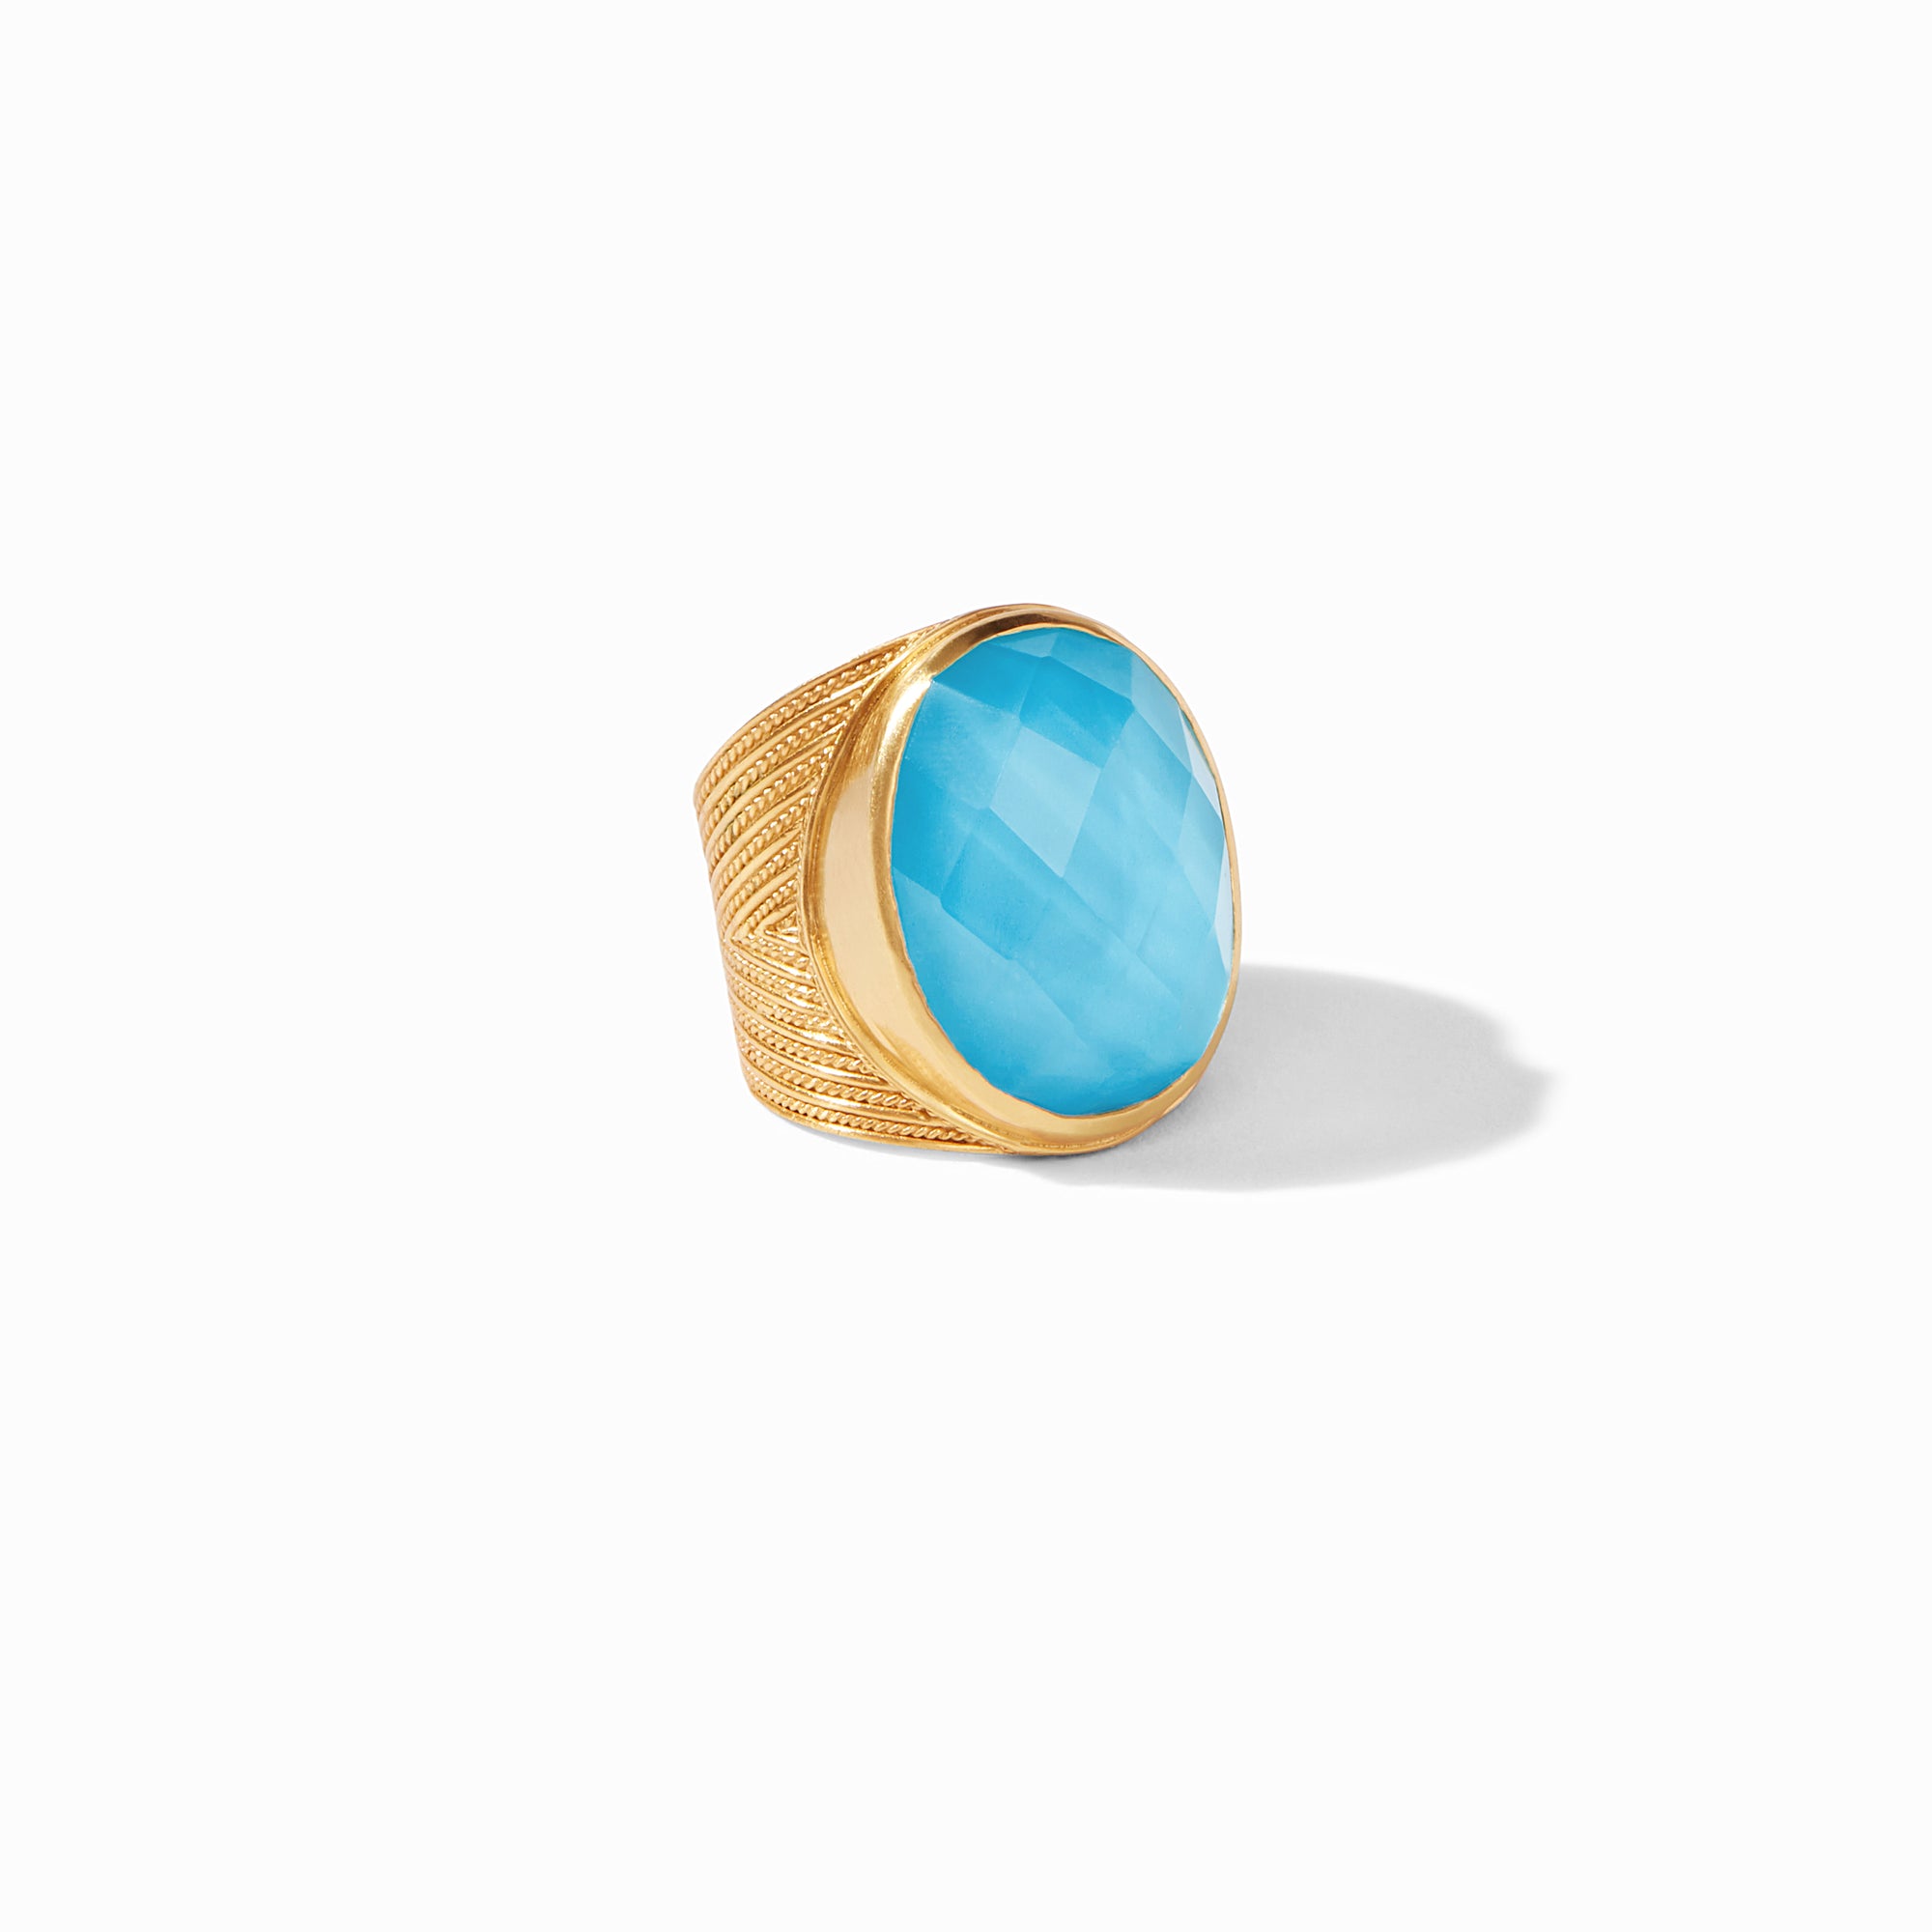 Julie Vos - Verona Statement Ring, Iridescent Pacific Blue / 9, Pacific Blue, rings, simone collection, avalon collection, oval jewels